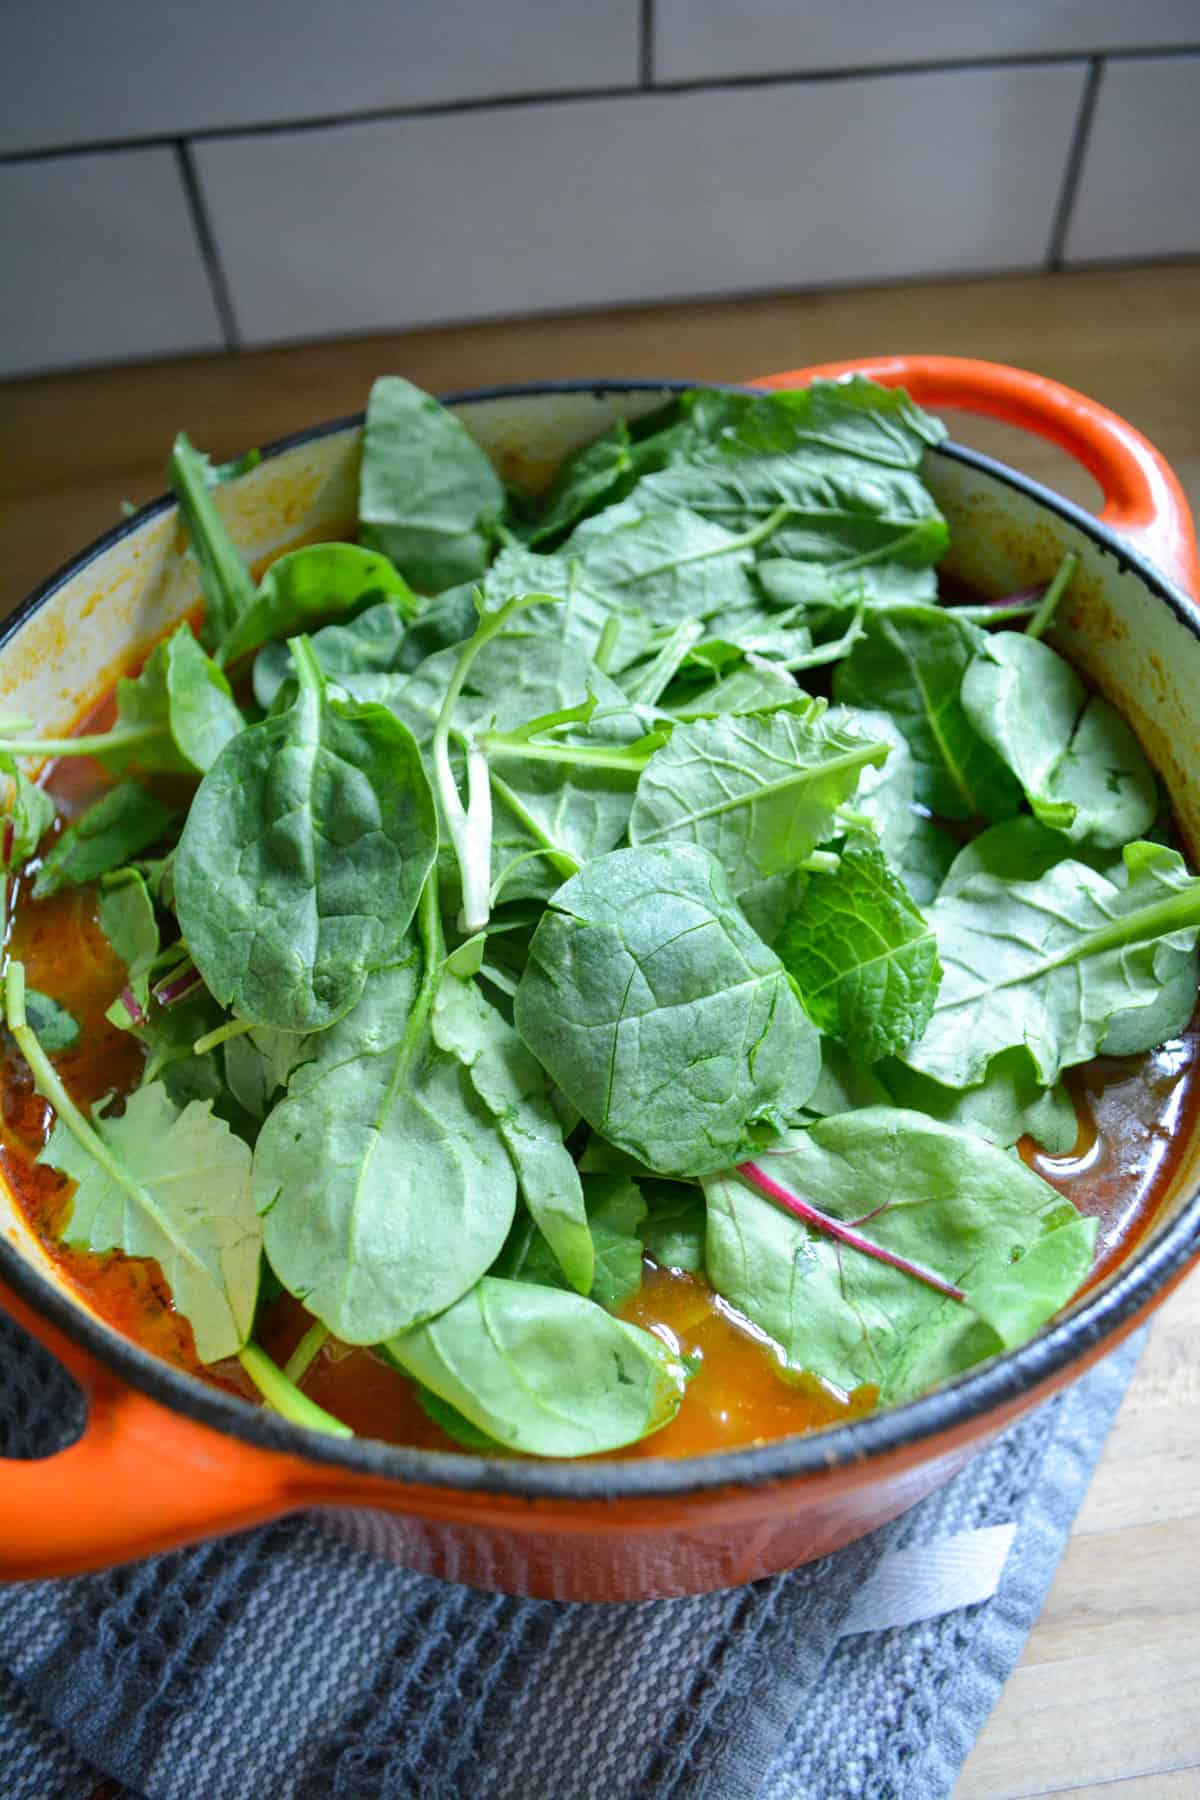 Spinach added into the soup.